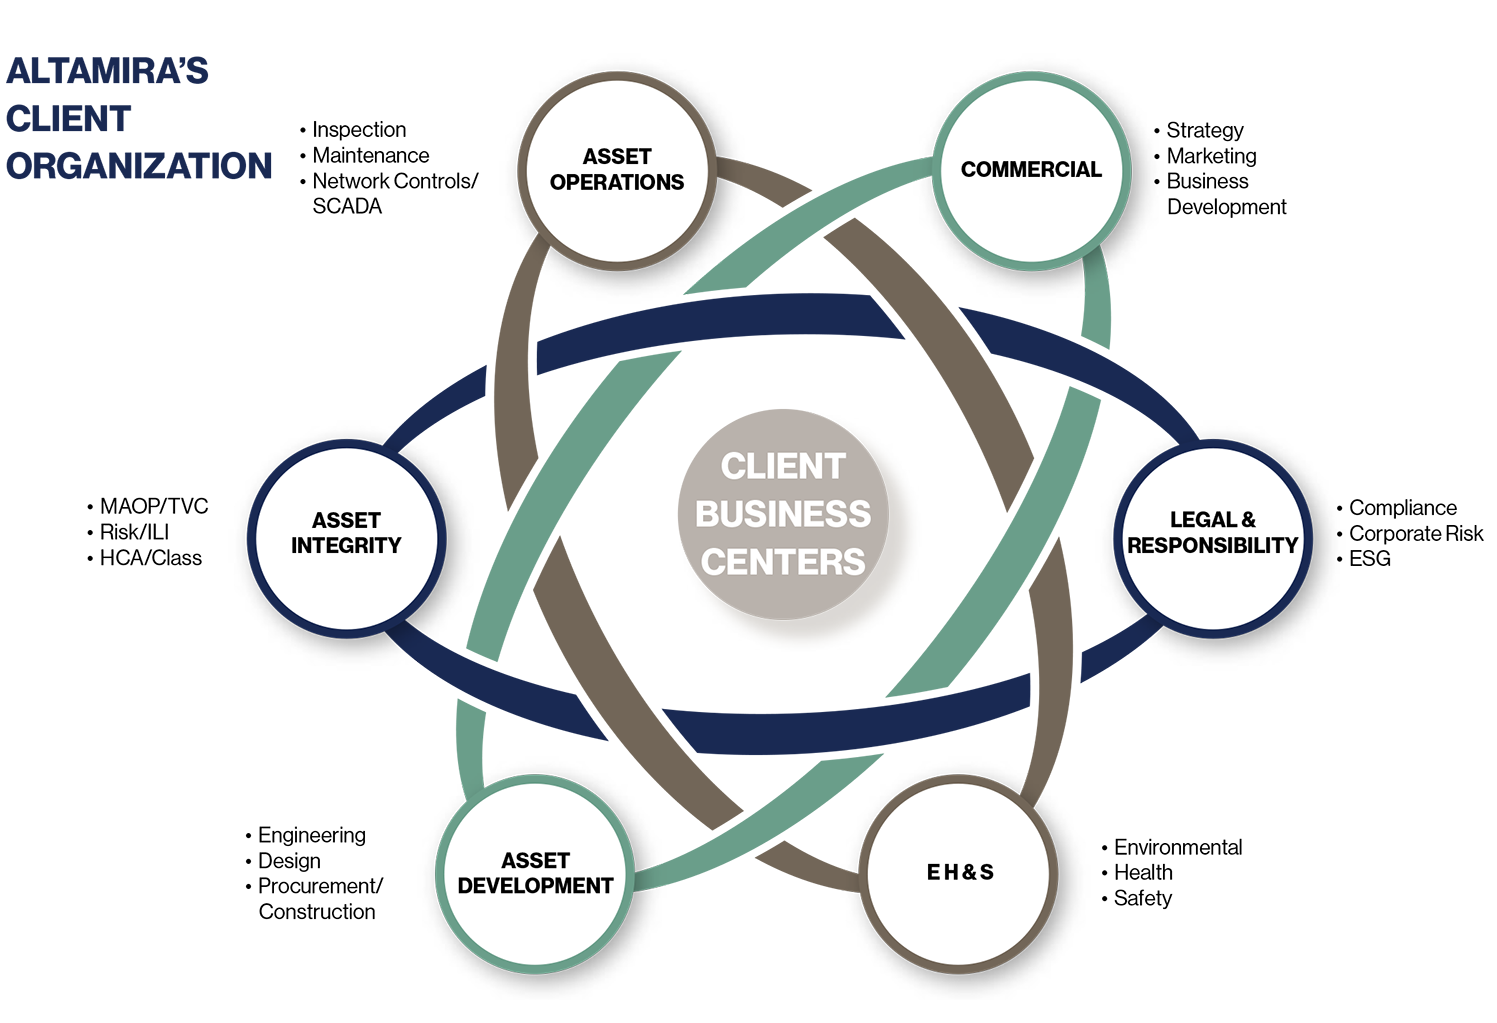 a diagram of Altamira 's client organization and client business centers.